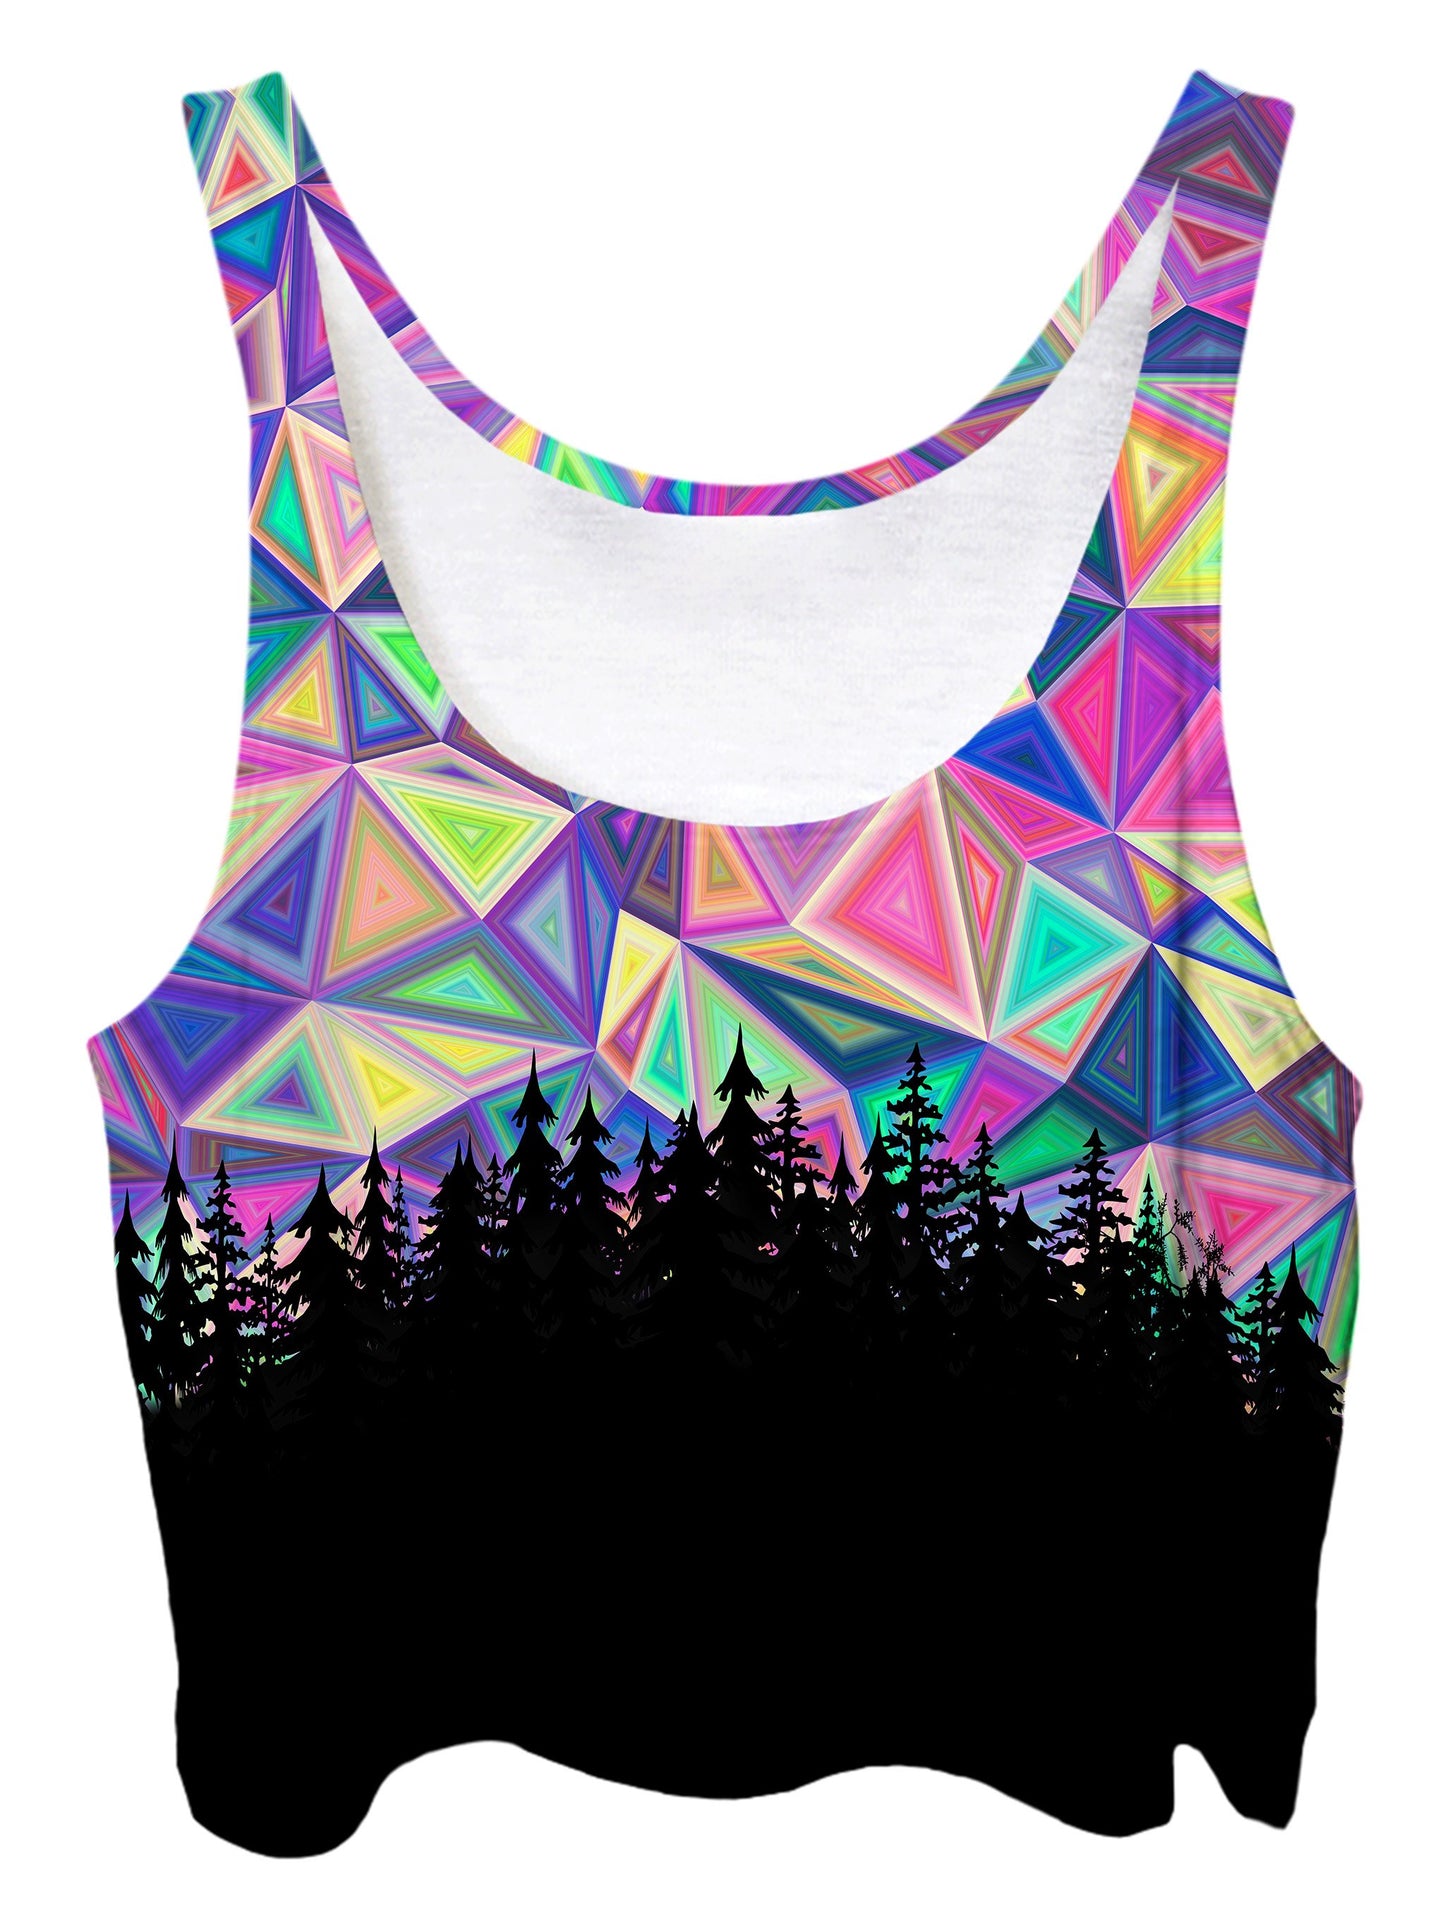 Trippy front view of GratefullyDyed Apparel rainbow geometry forest crop top.